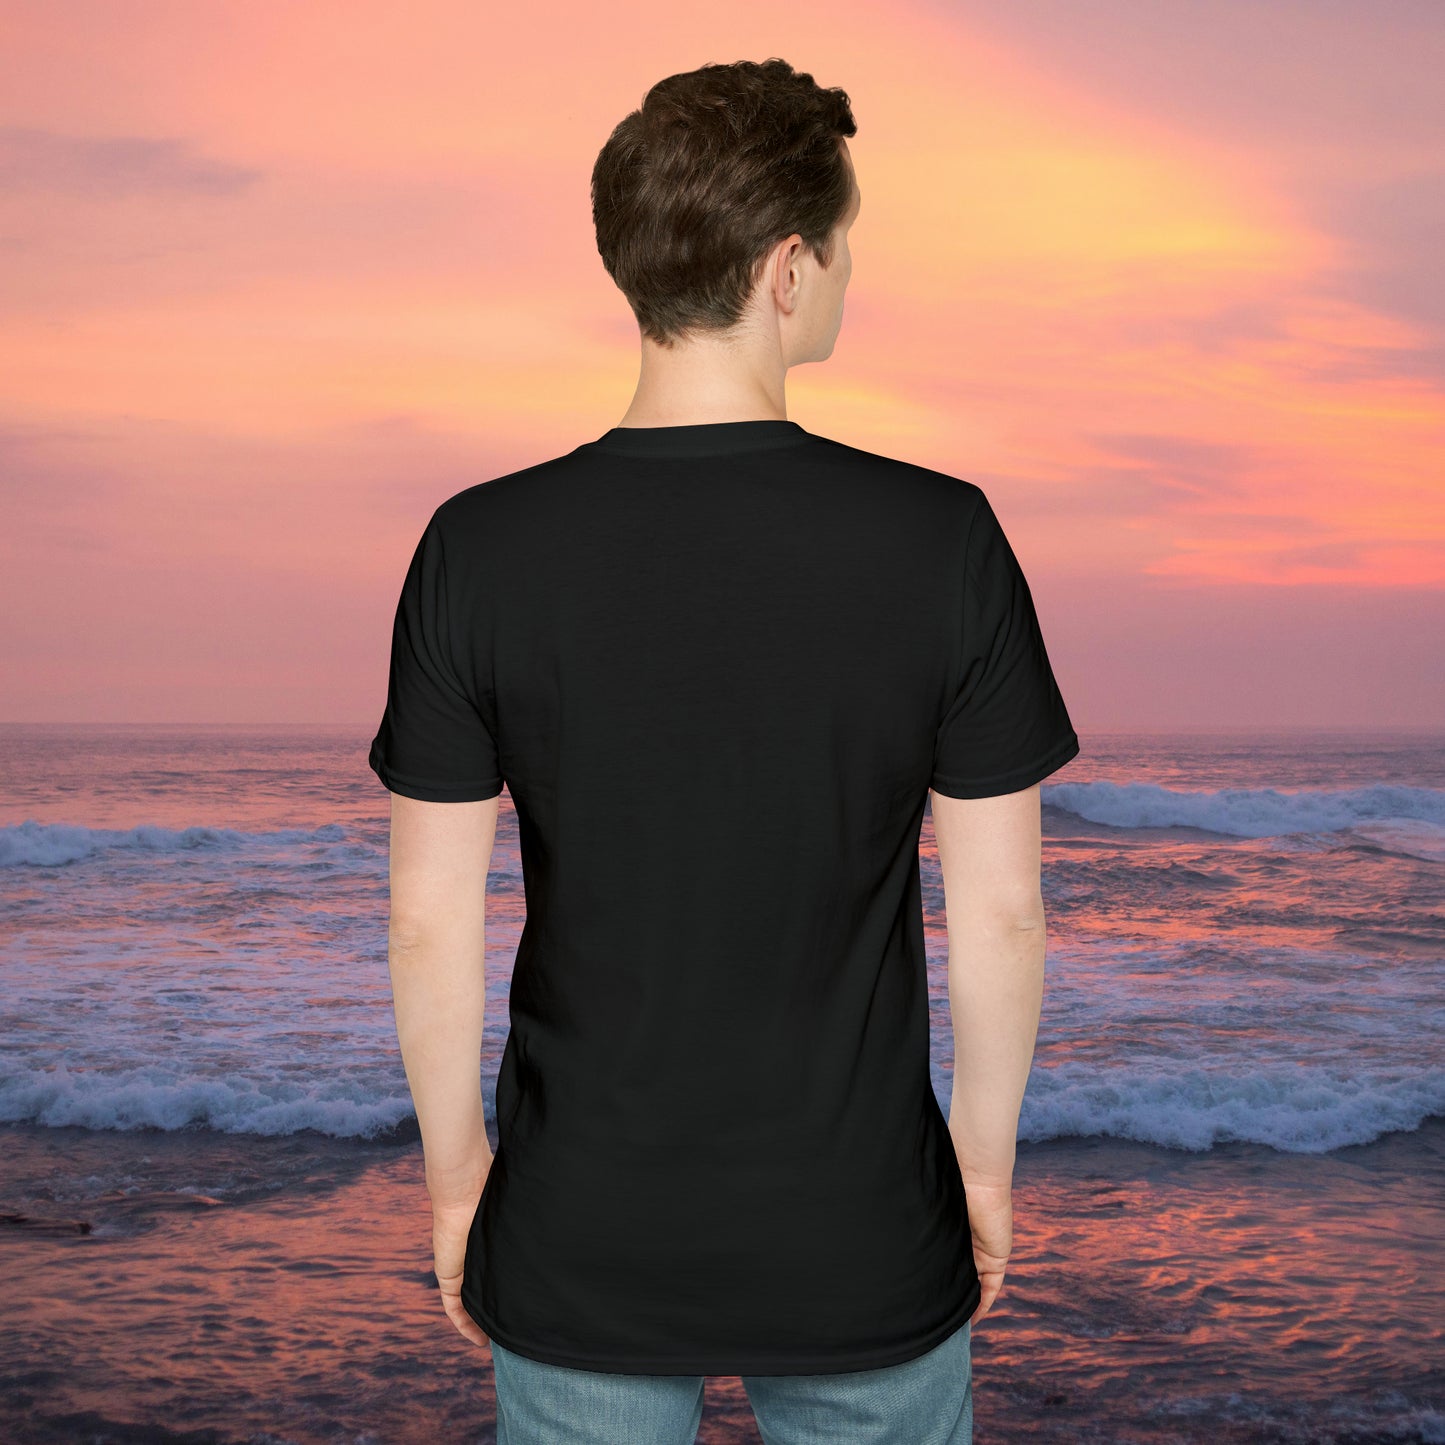 Love whales? Who doesn’t? These magnificent marine mammals are the largest animals to ever exist and some sing beautifully. They inspired this Unisex Softstyle T-Shirt design.